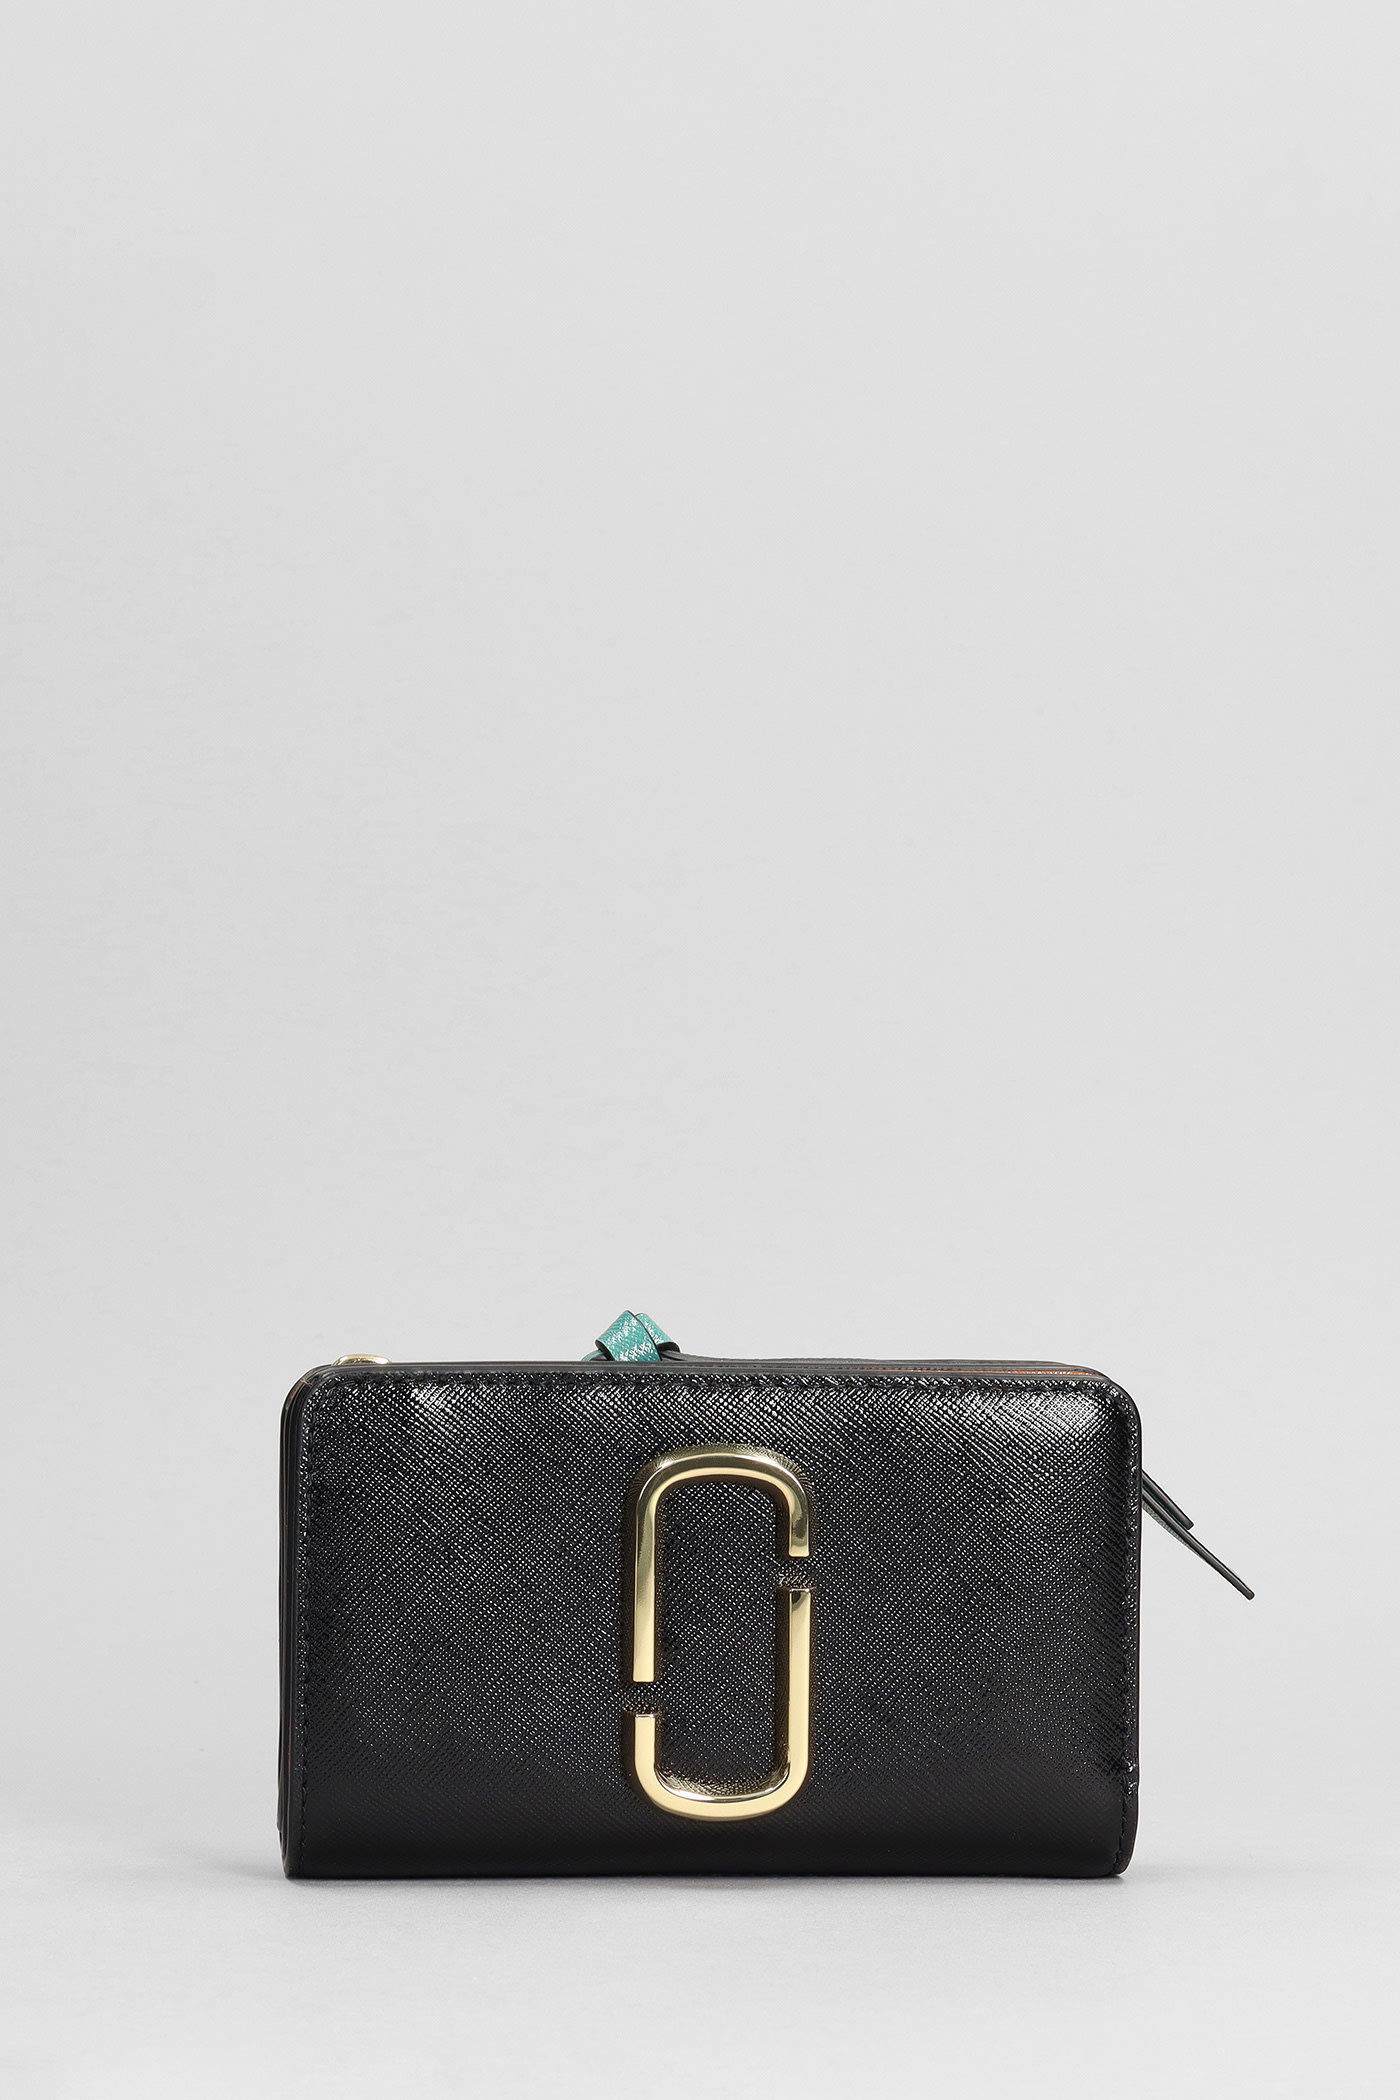 MARC JACOBS WALLET IN BLACK LEATHER